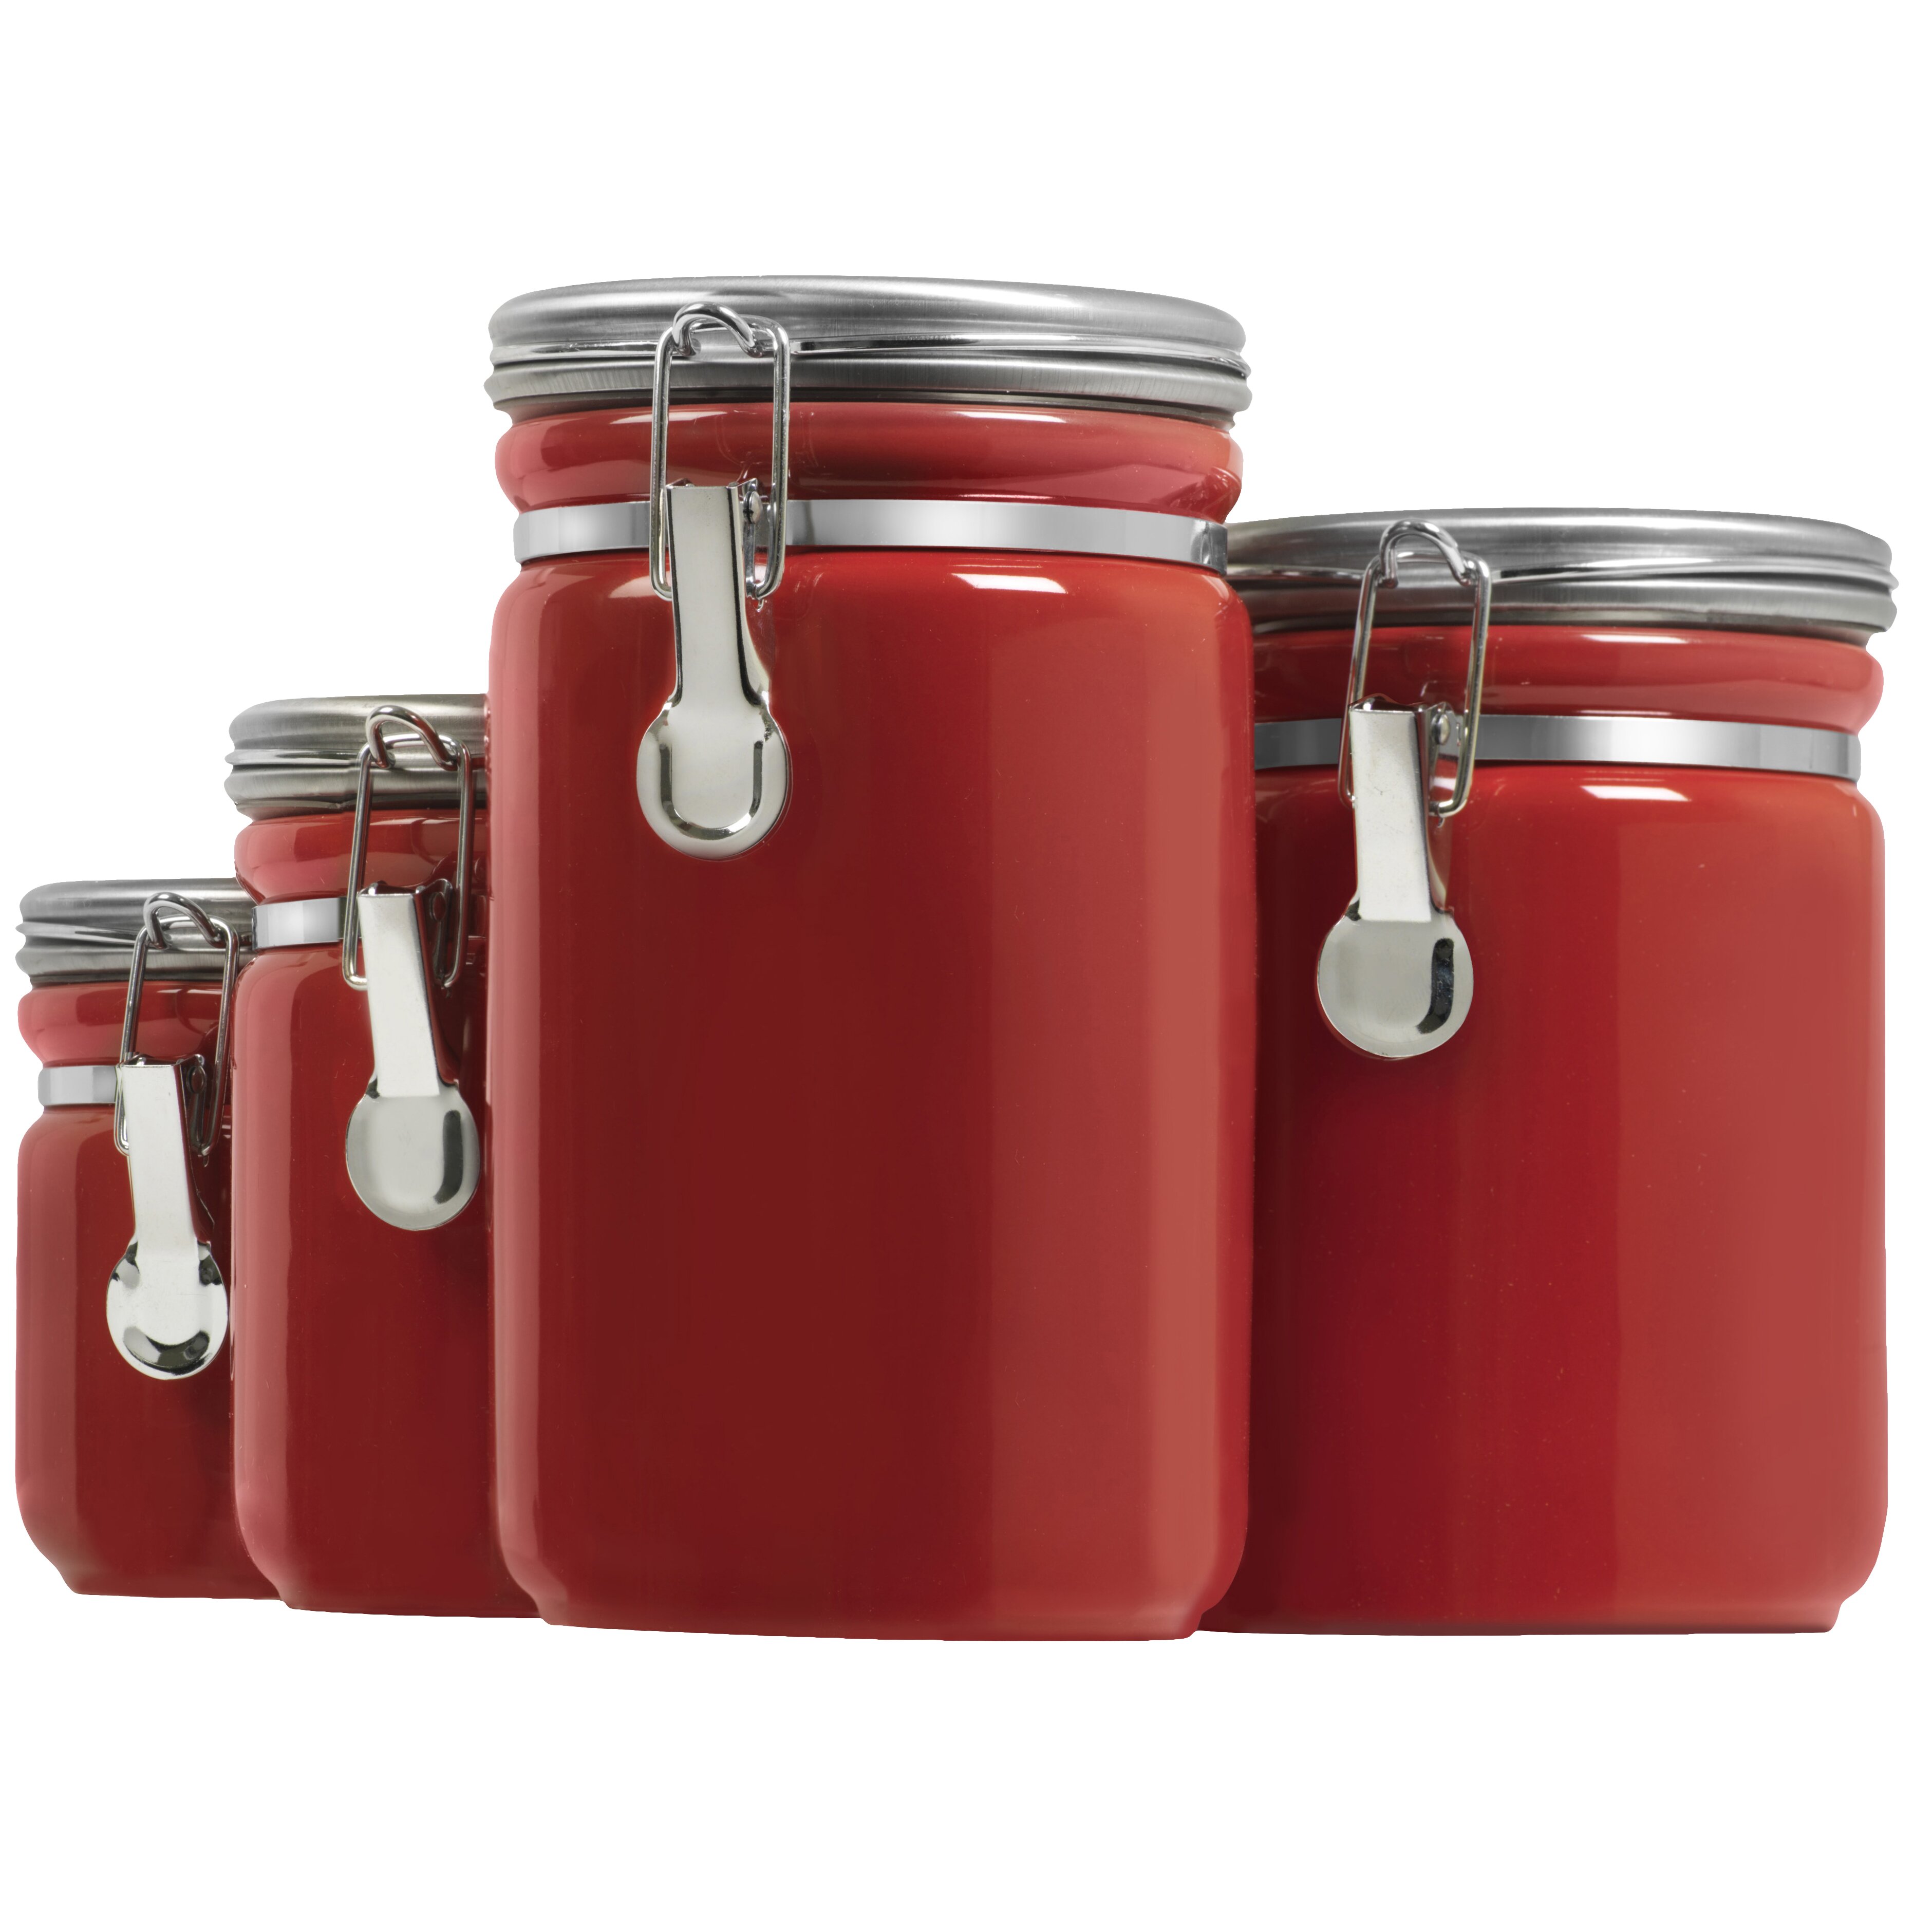 Anchor Hocking 4 Piece Kitchen Canister Set And Reviews Wayfair